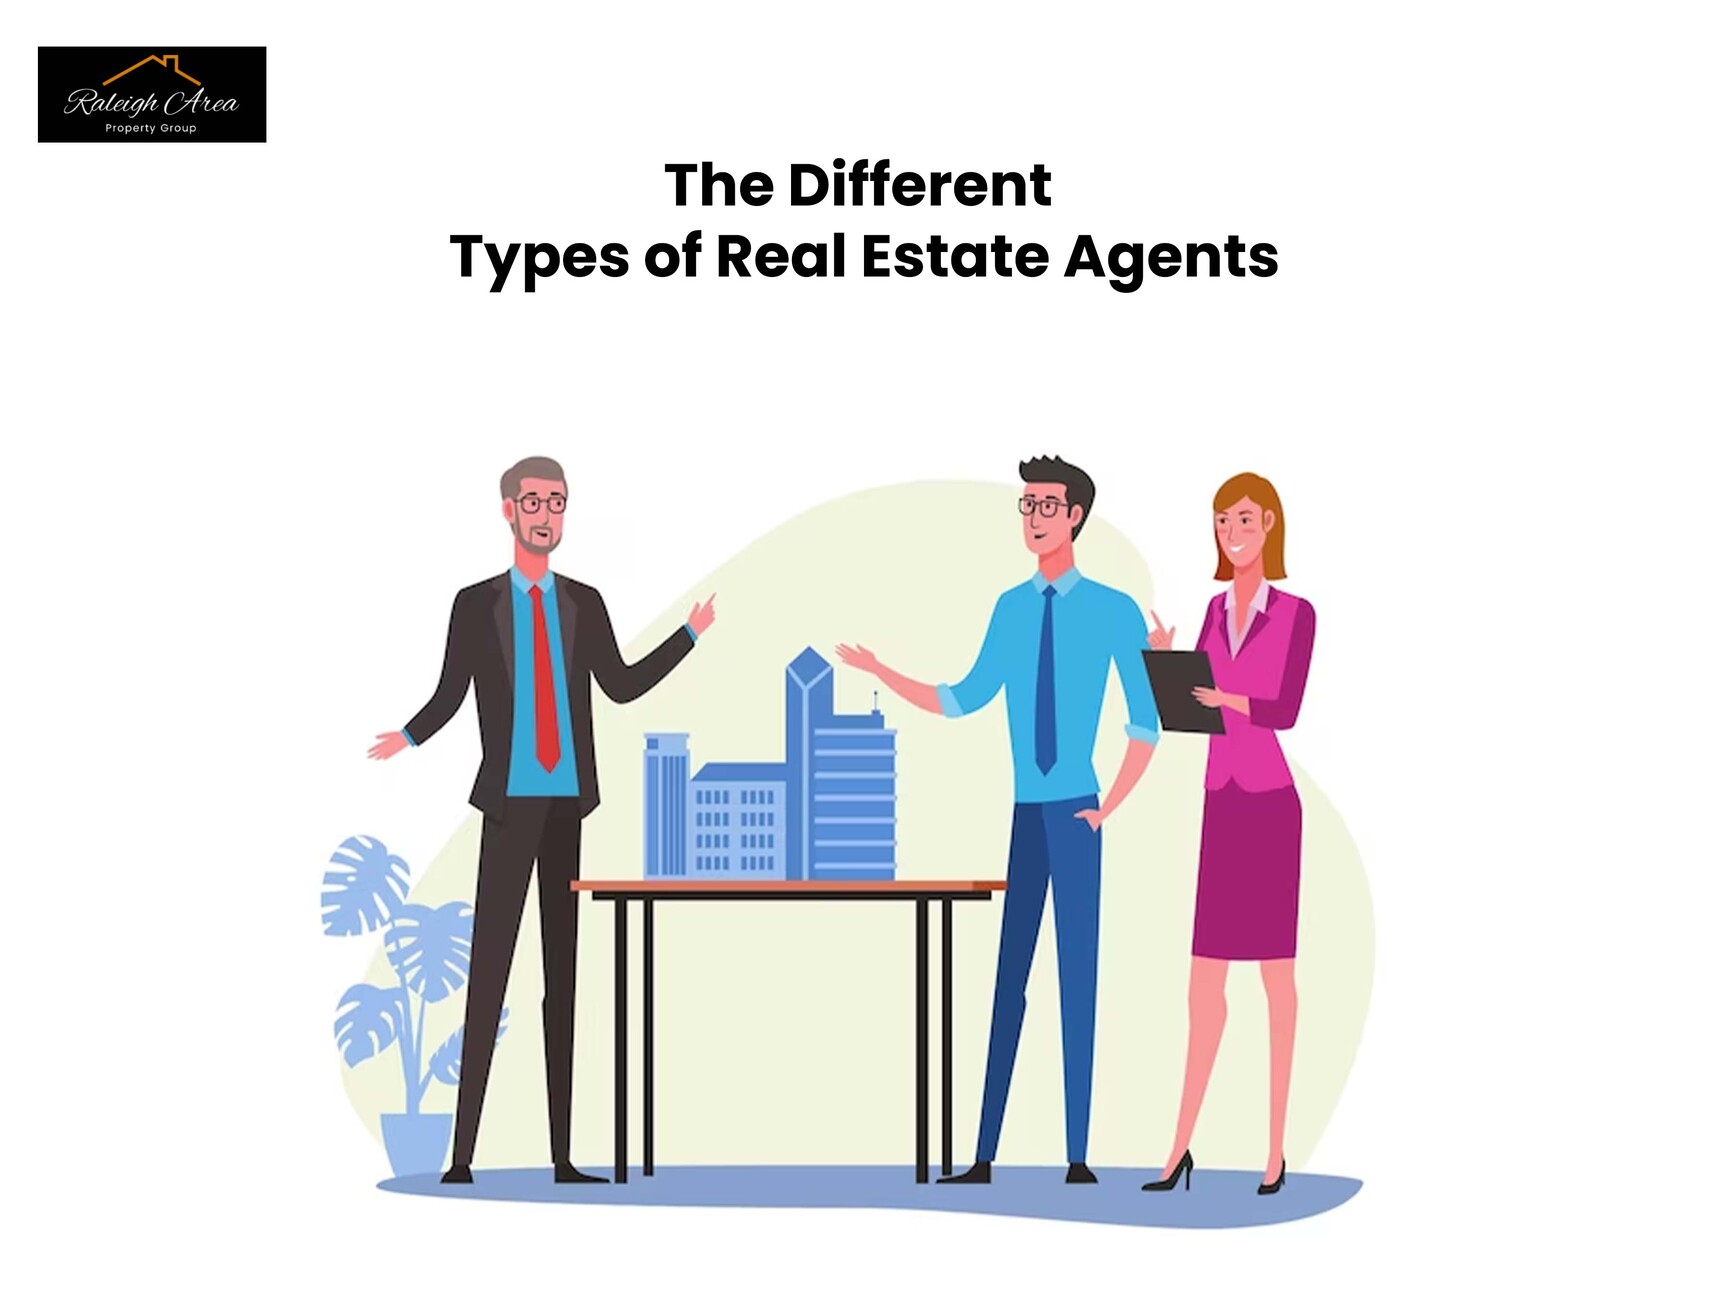 The Different Types of Real Estate Agents